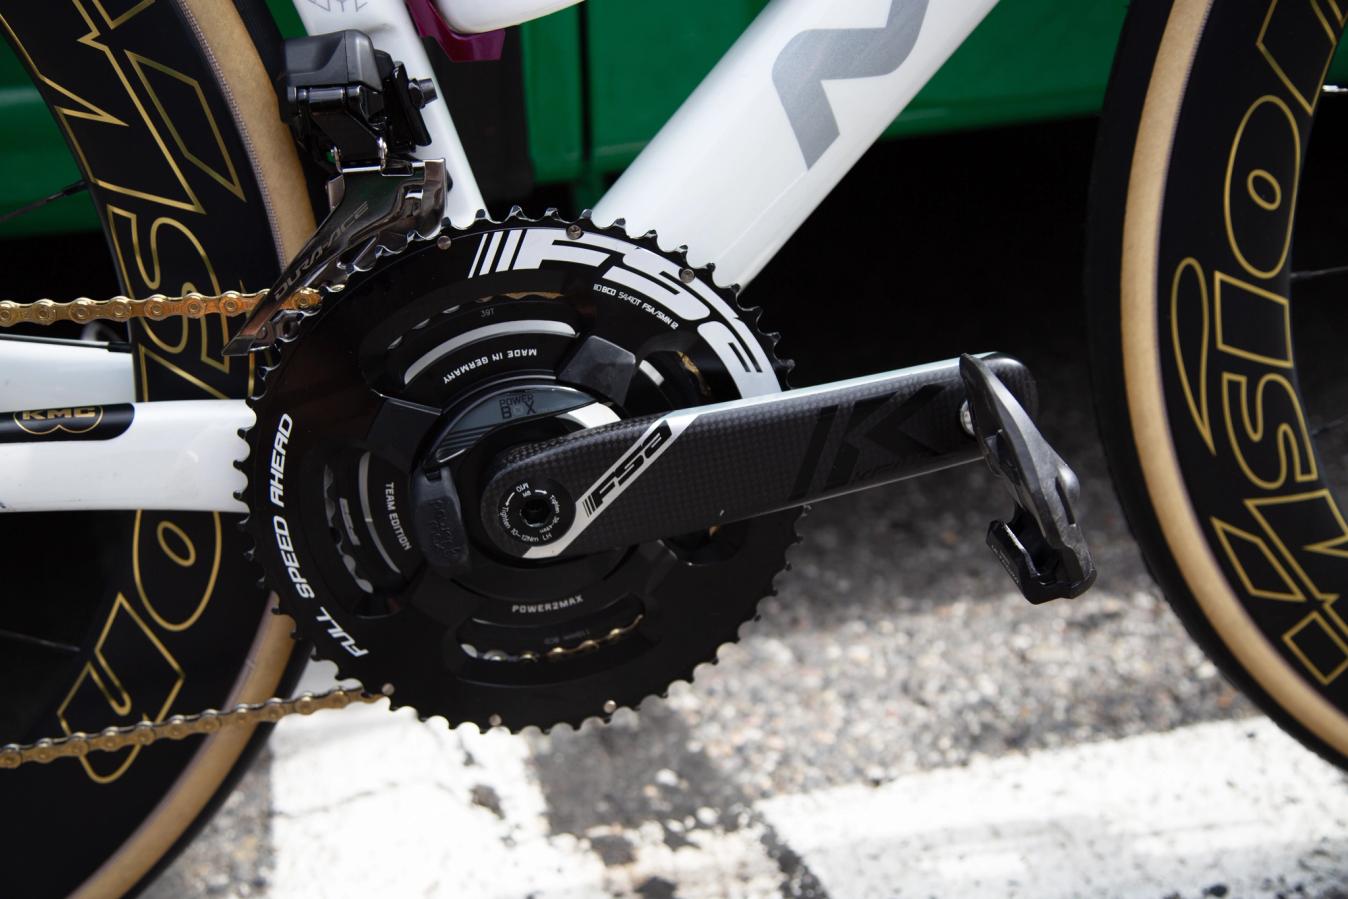 The FSA crankset is paired with Shimano Dura-Ace derailleurs and shifters